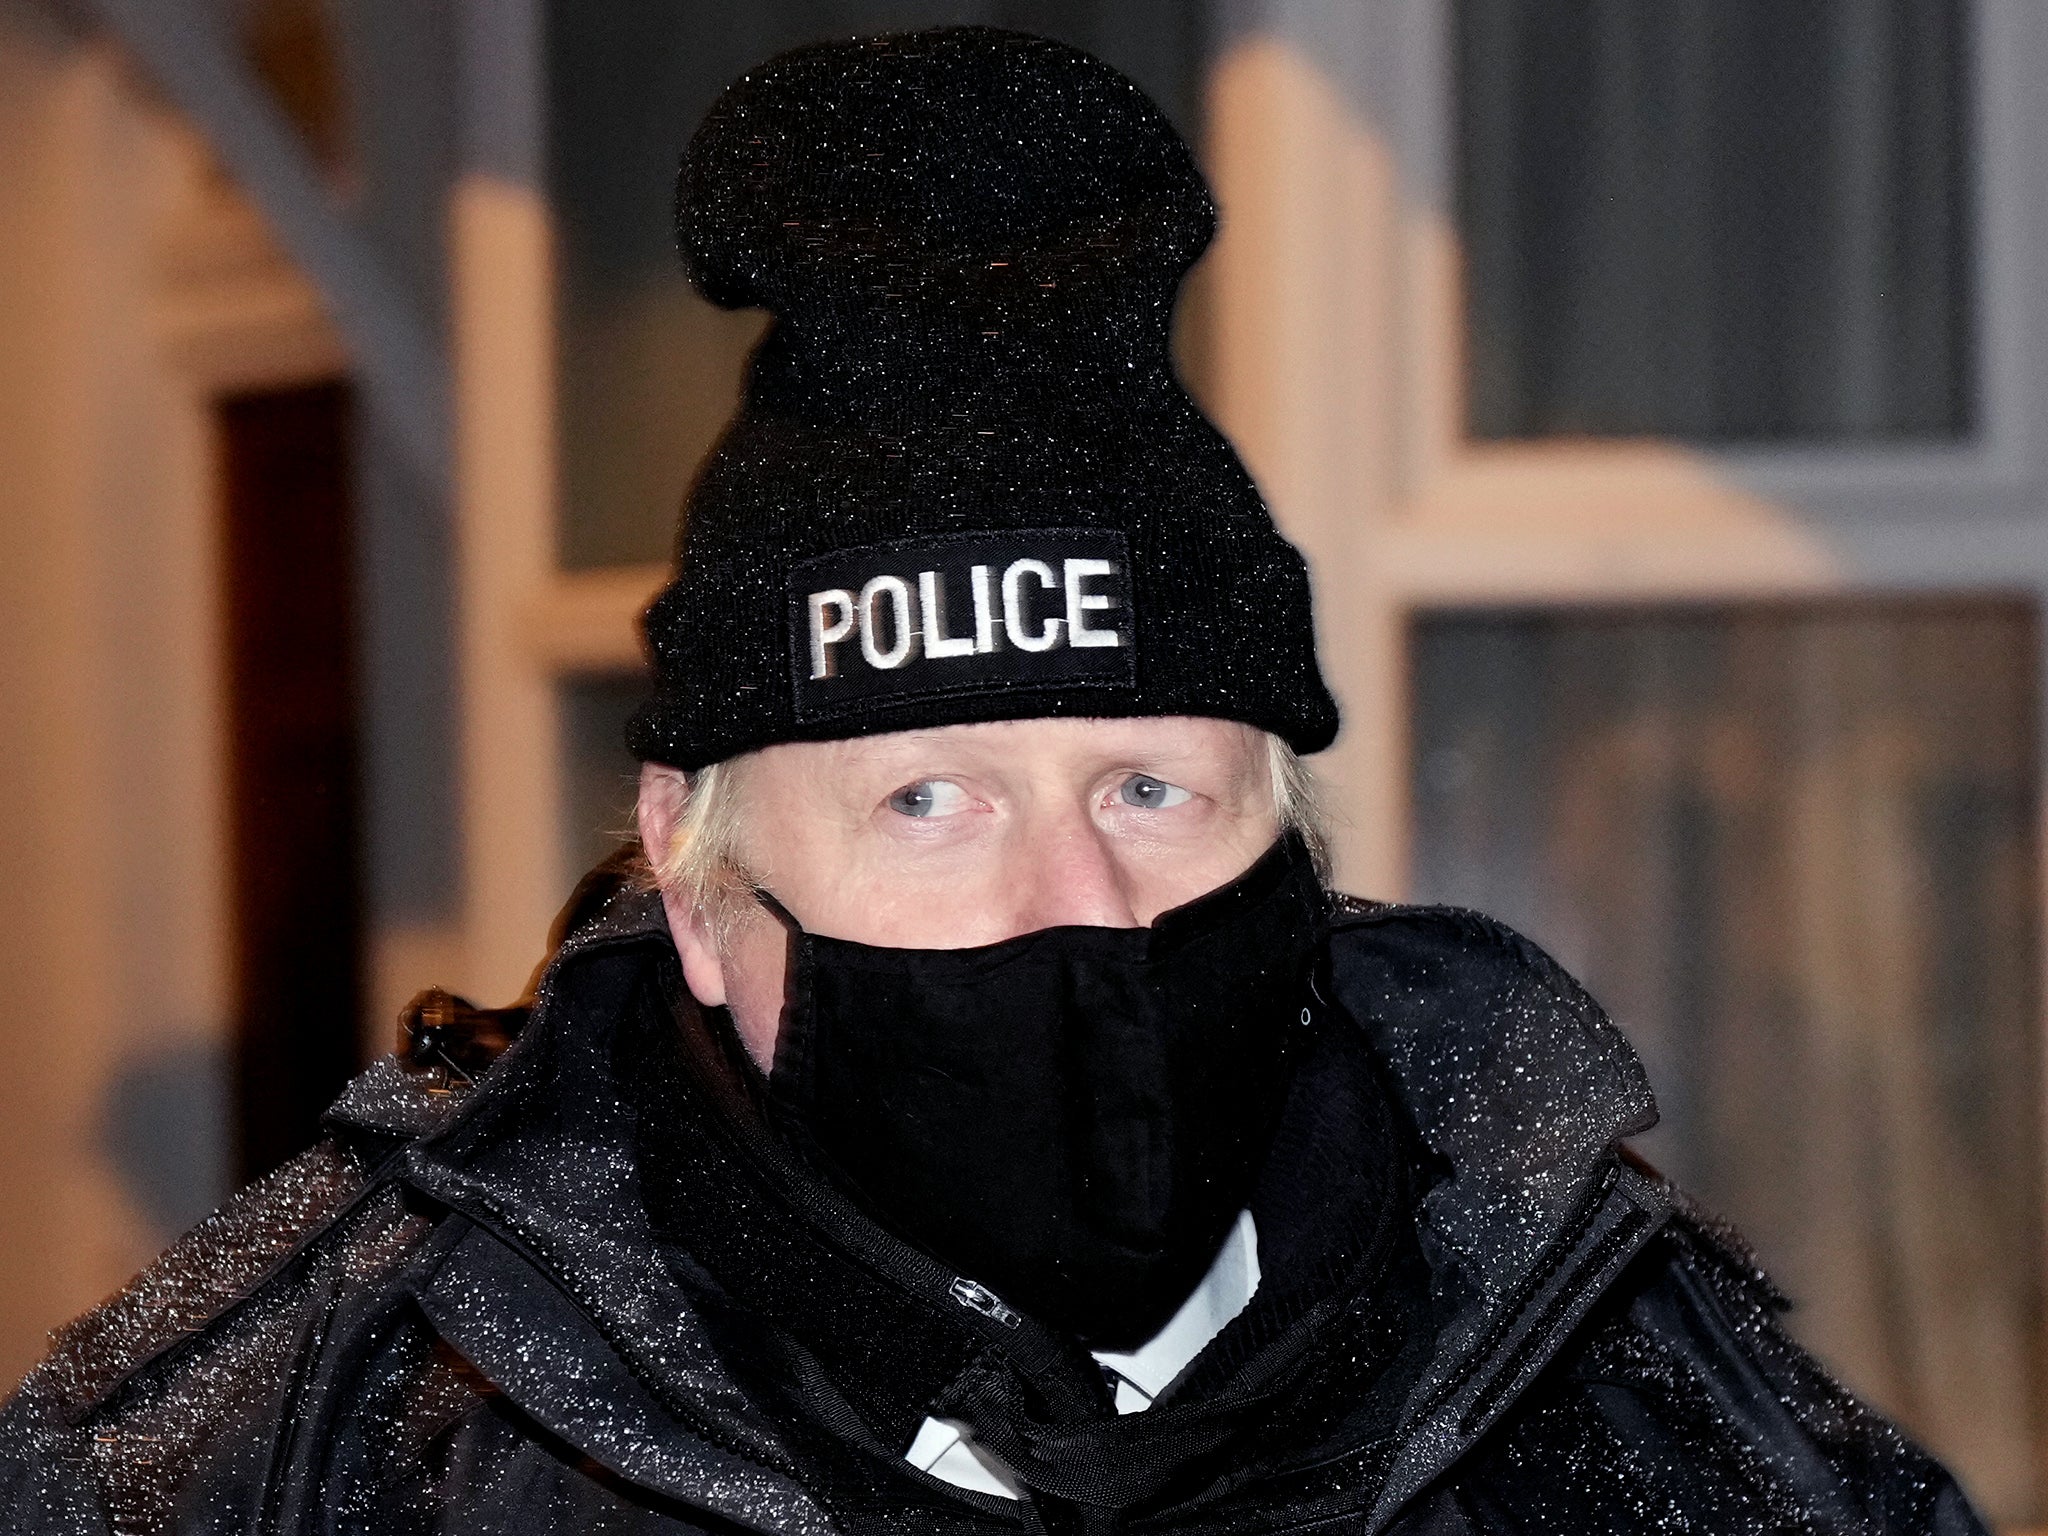 Boris Johnson observes an early morning Merseyside police raid on a home in Liverpool as part of 'Operation Toxic' to infiltrate County Lines drug dealings in Liverpool